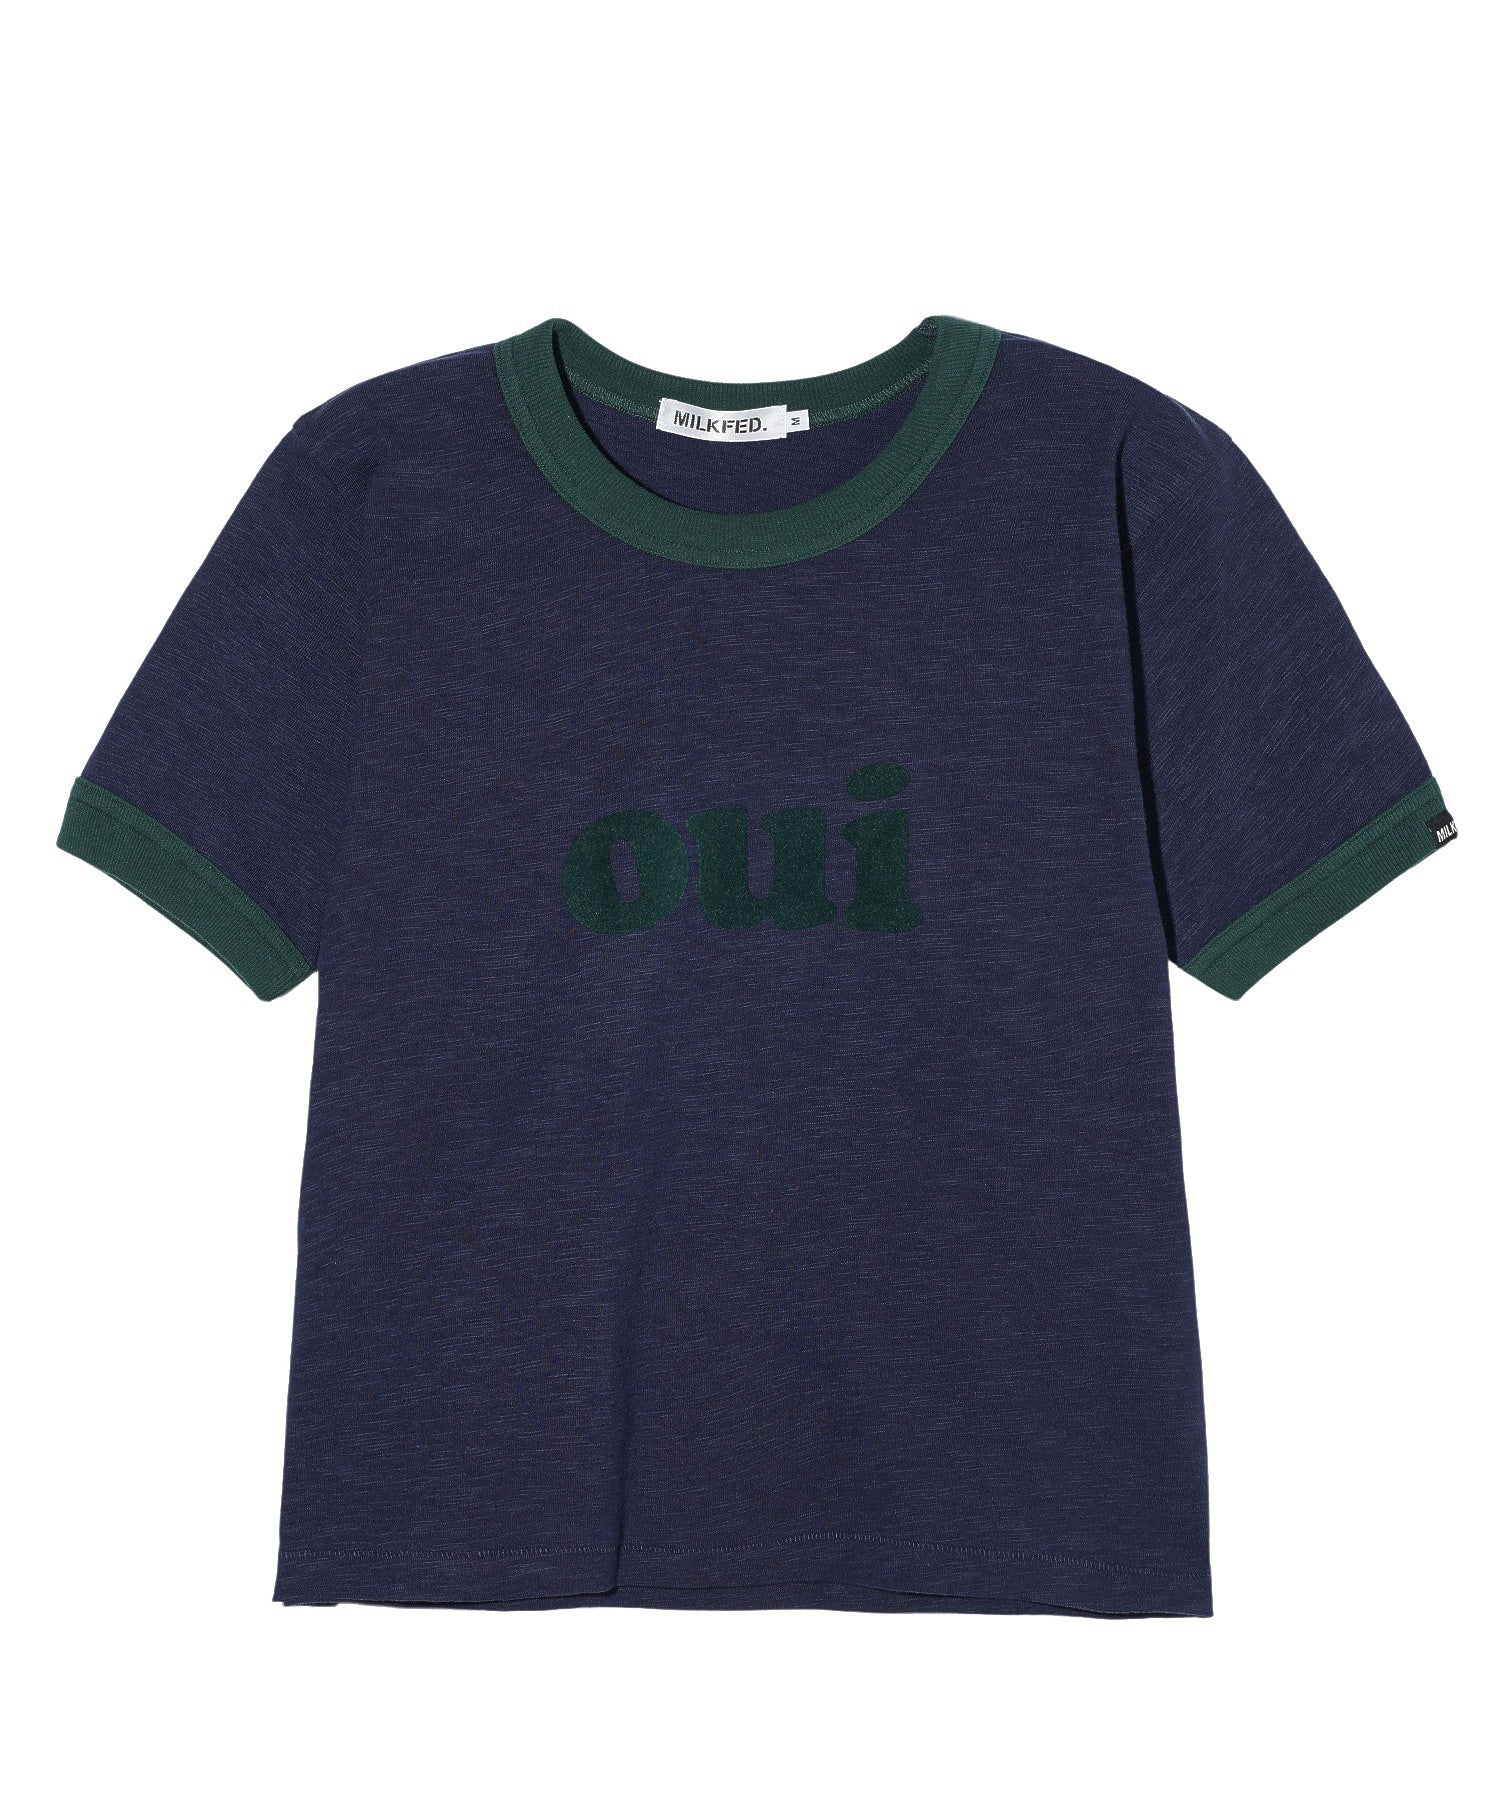 OUI SLAB COMPACT S/S RINGER TEE